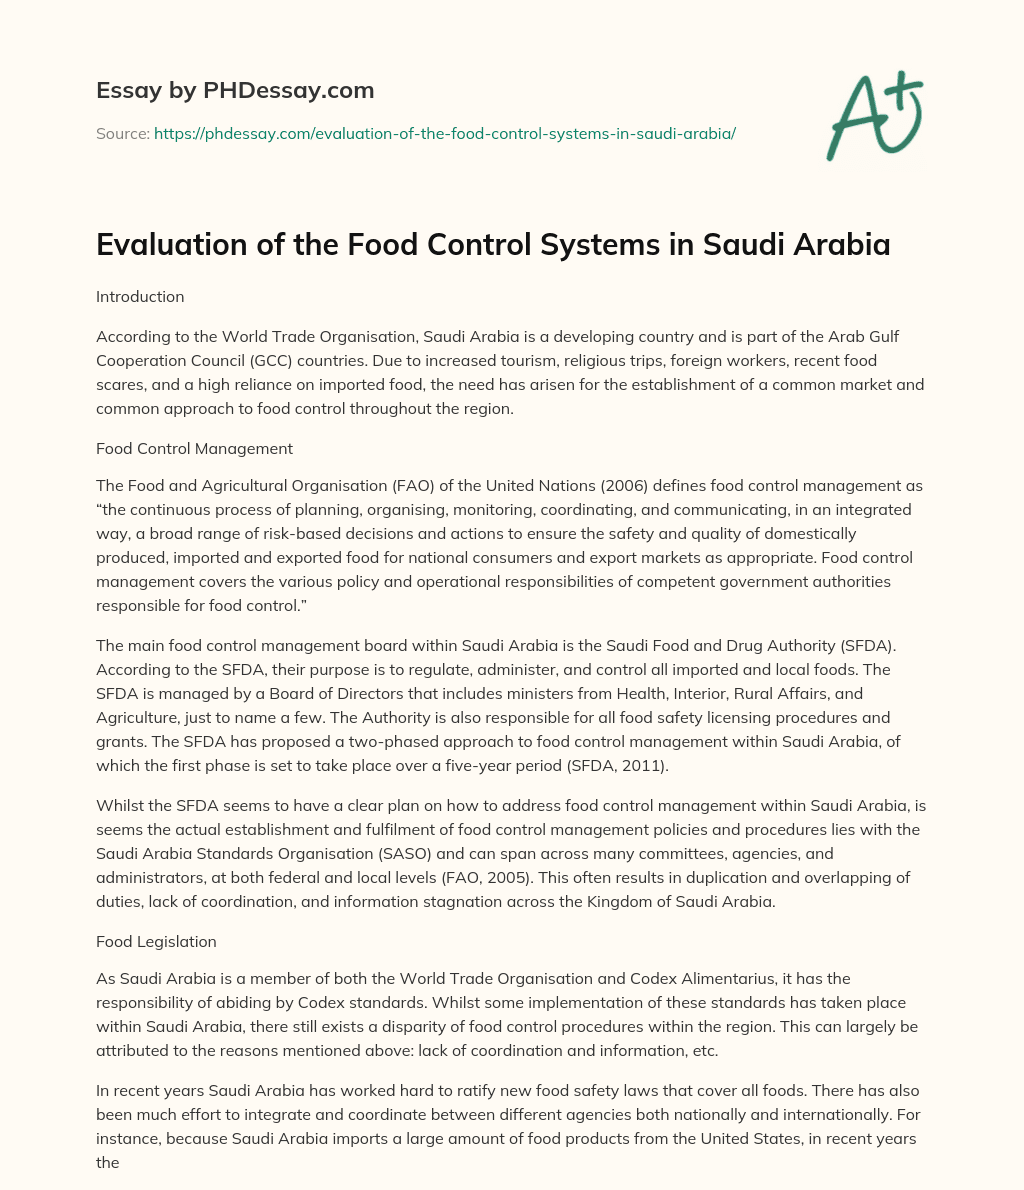 Evaluation of the Food Control Systems in Saudi Arabia essay